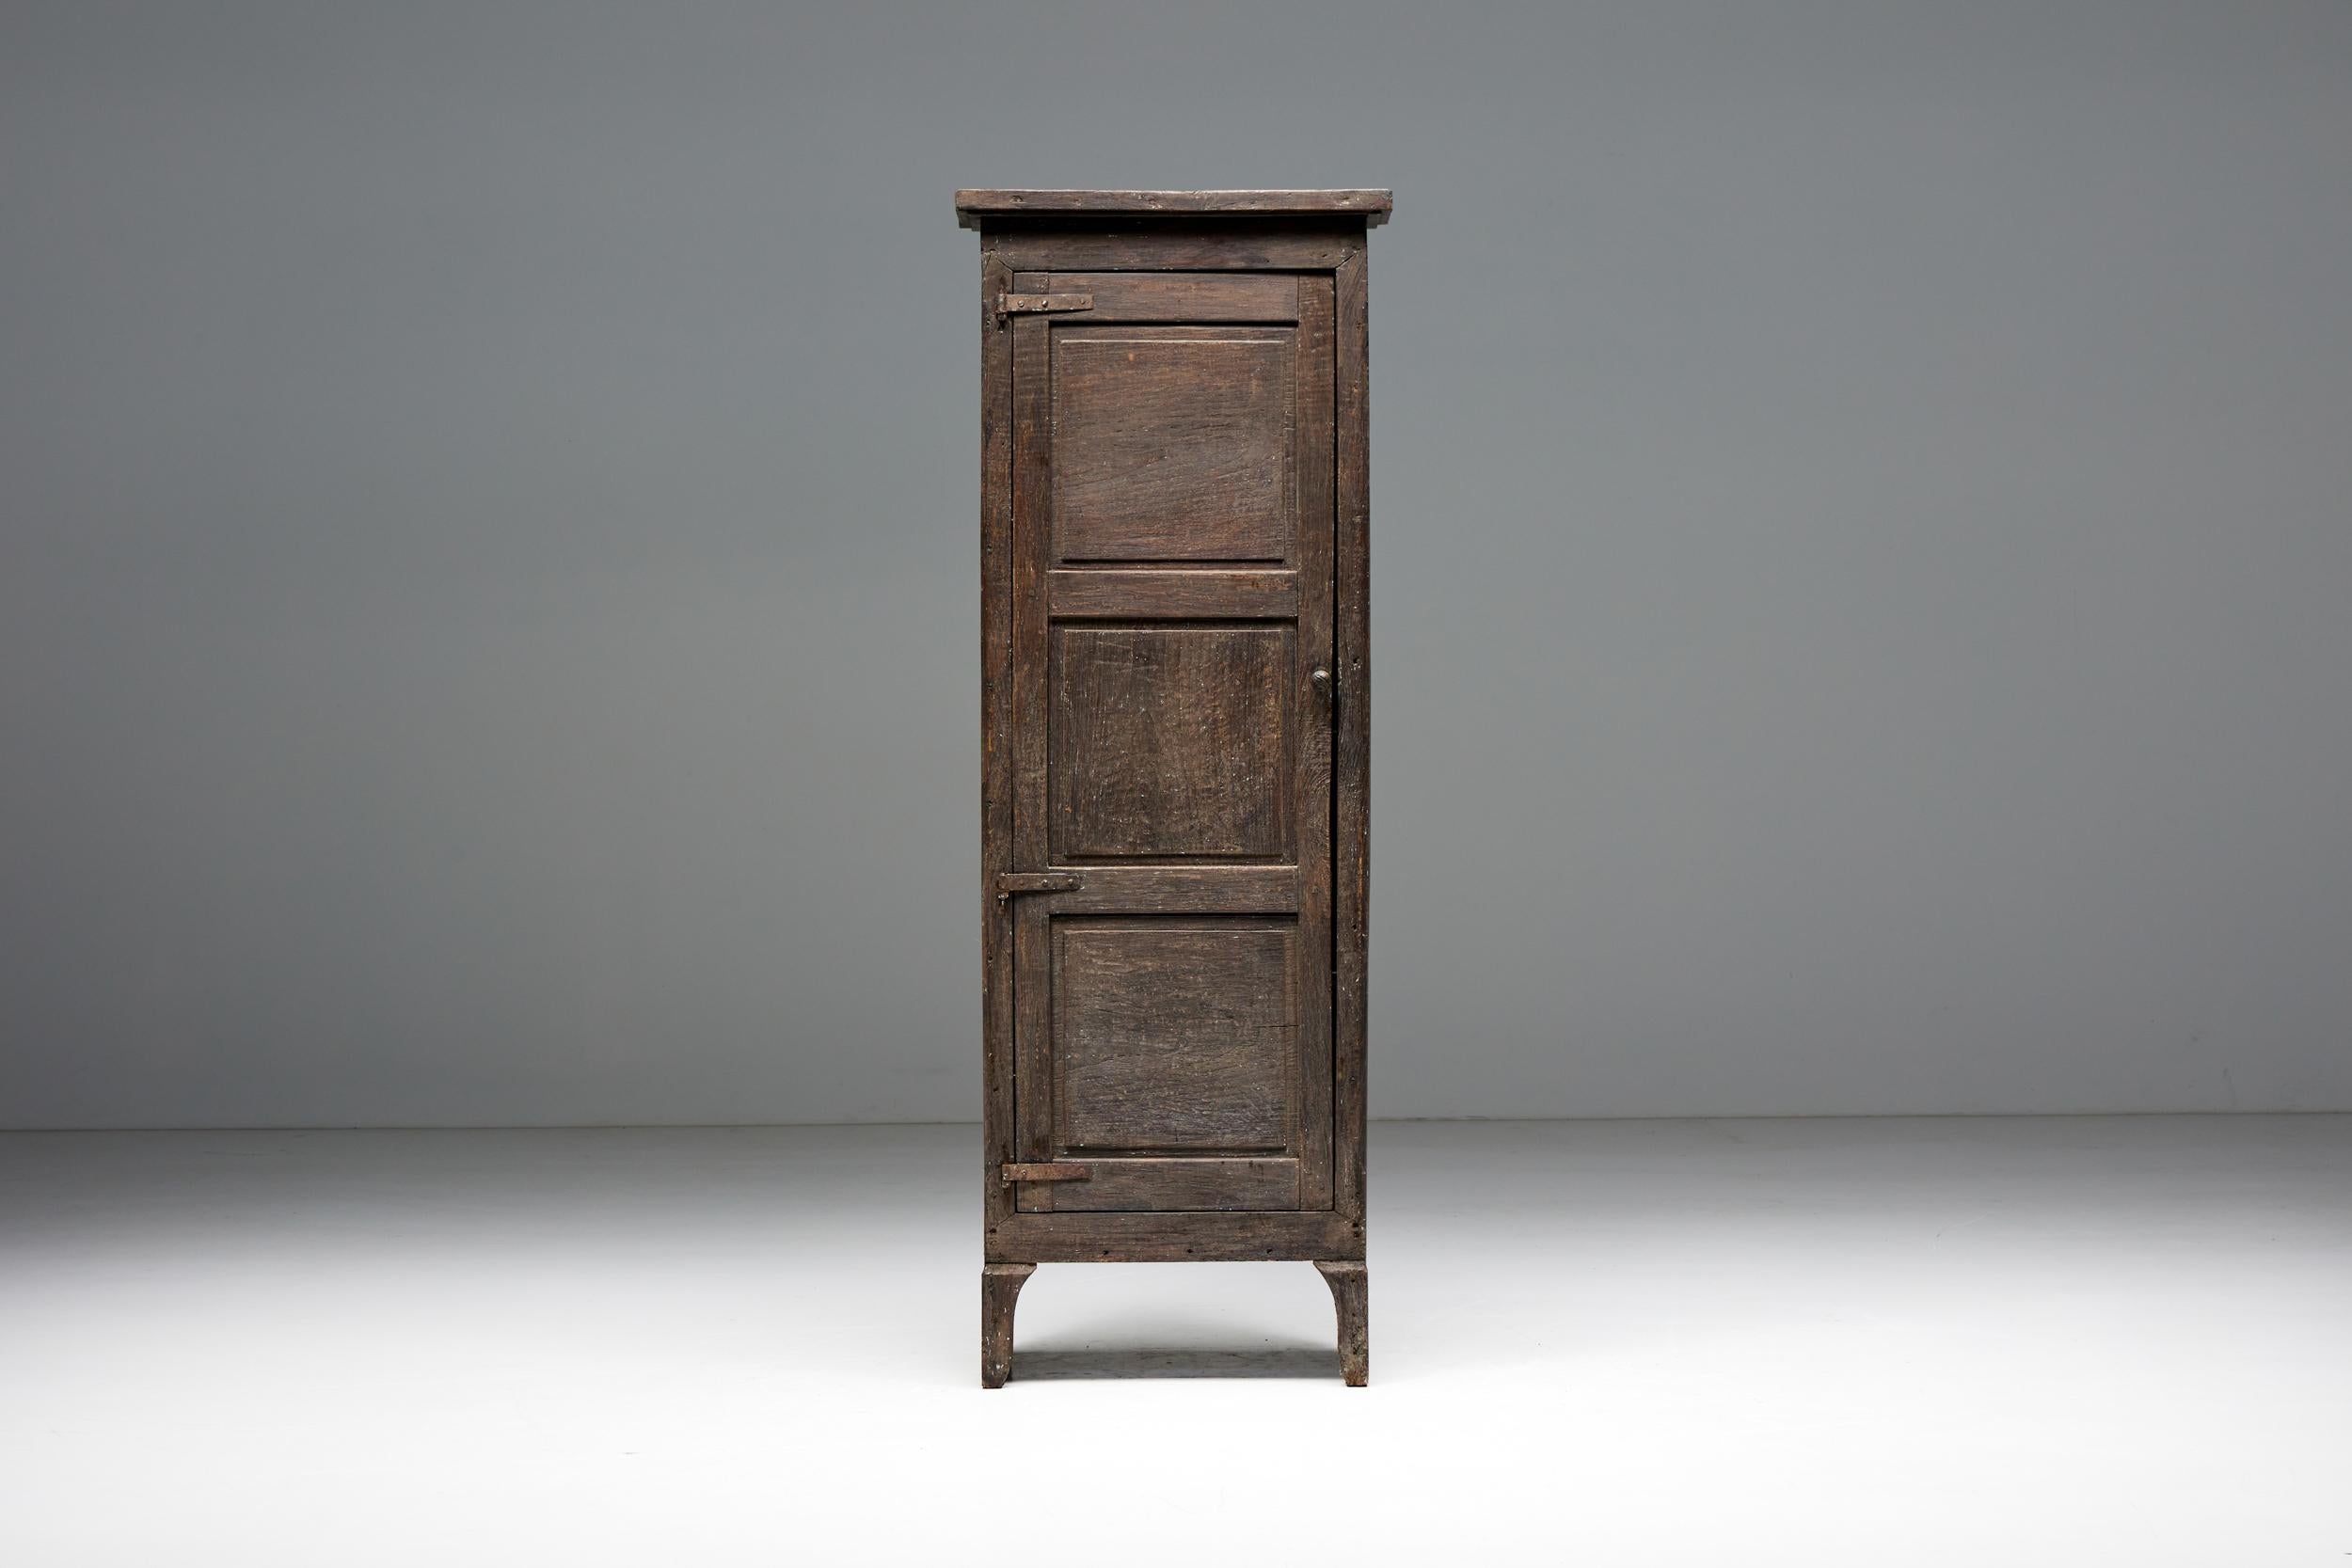 Monoxylite; Art Populaire; Travail Populaire; Folk Art; Wabi Sabi; 19th Century; France; Cupboard; Cabinet; Rustic; Artisan; Craftsmanship;

Travail populaire one-door cupboard, a stunning example of skilled craftsmanship. Meticulously handcrafted